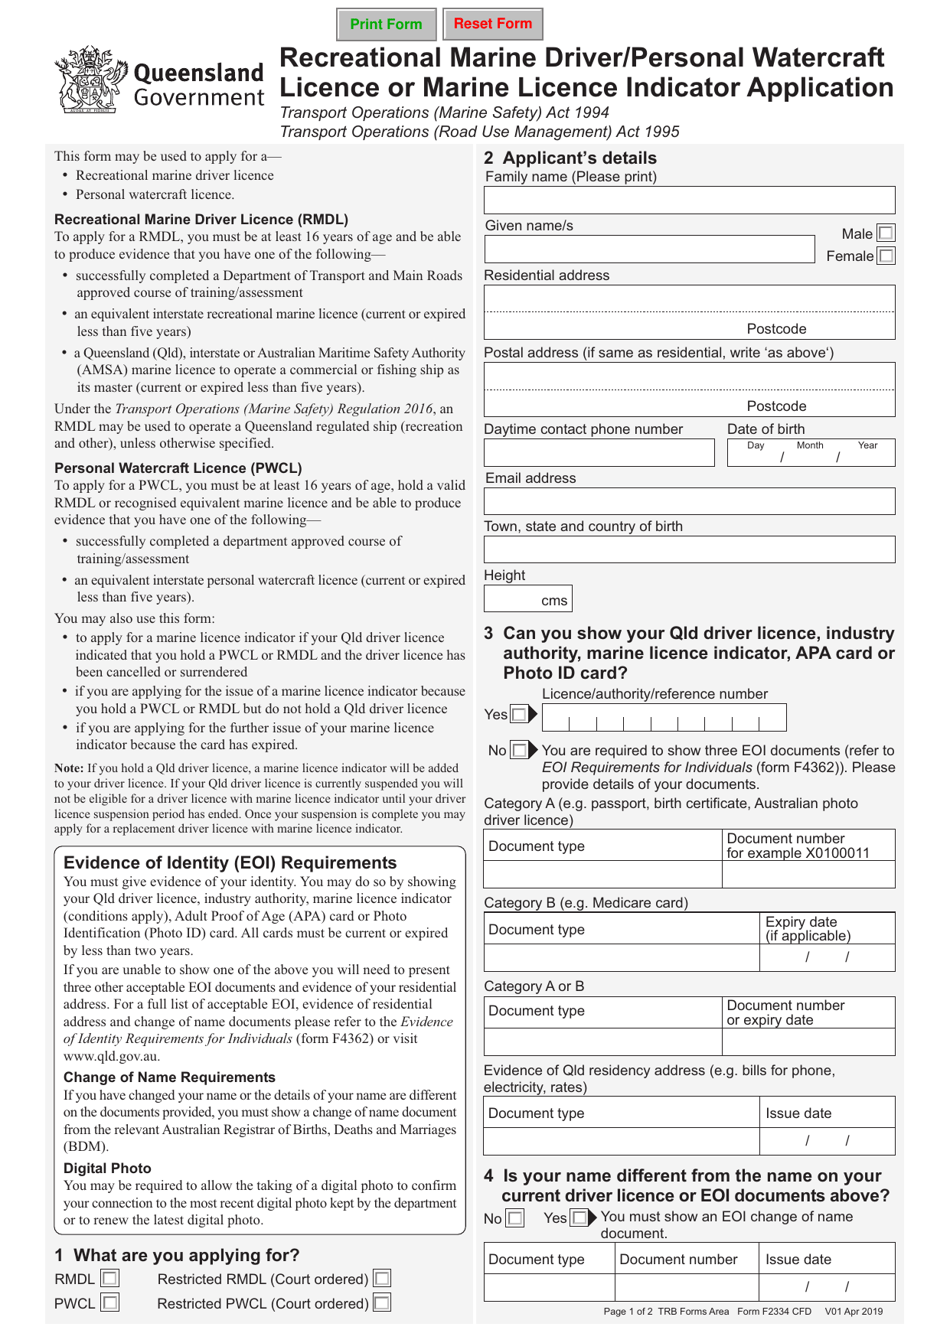 Form F2334 Recreational Marine Driver / Personal Watercraft Licence or Marine Licence Indicator Application - Queensland, Australia, Page 1